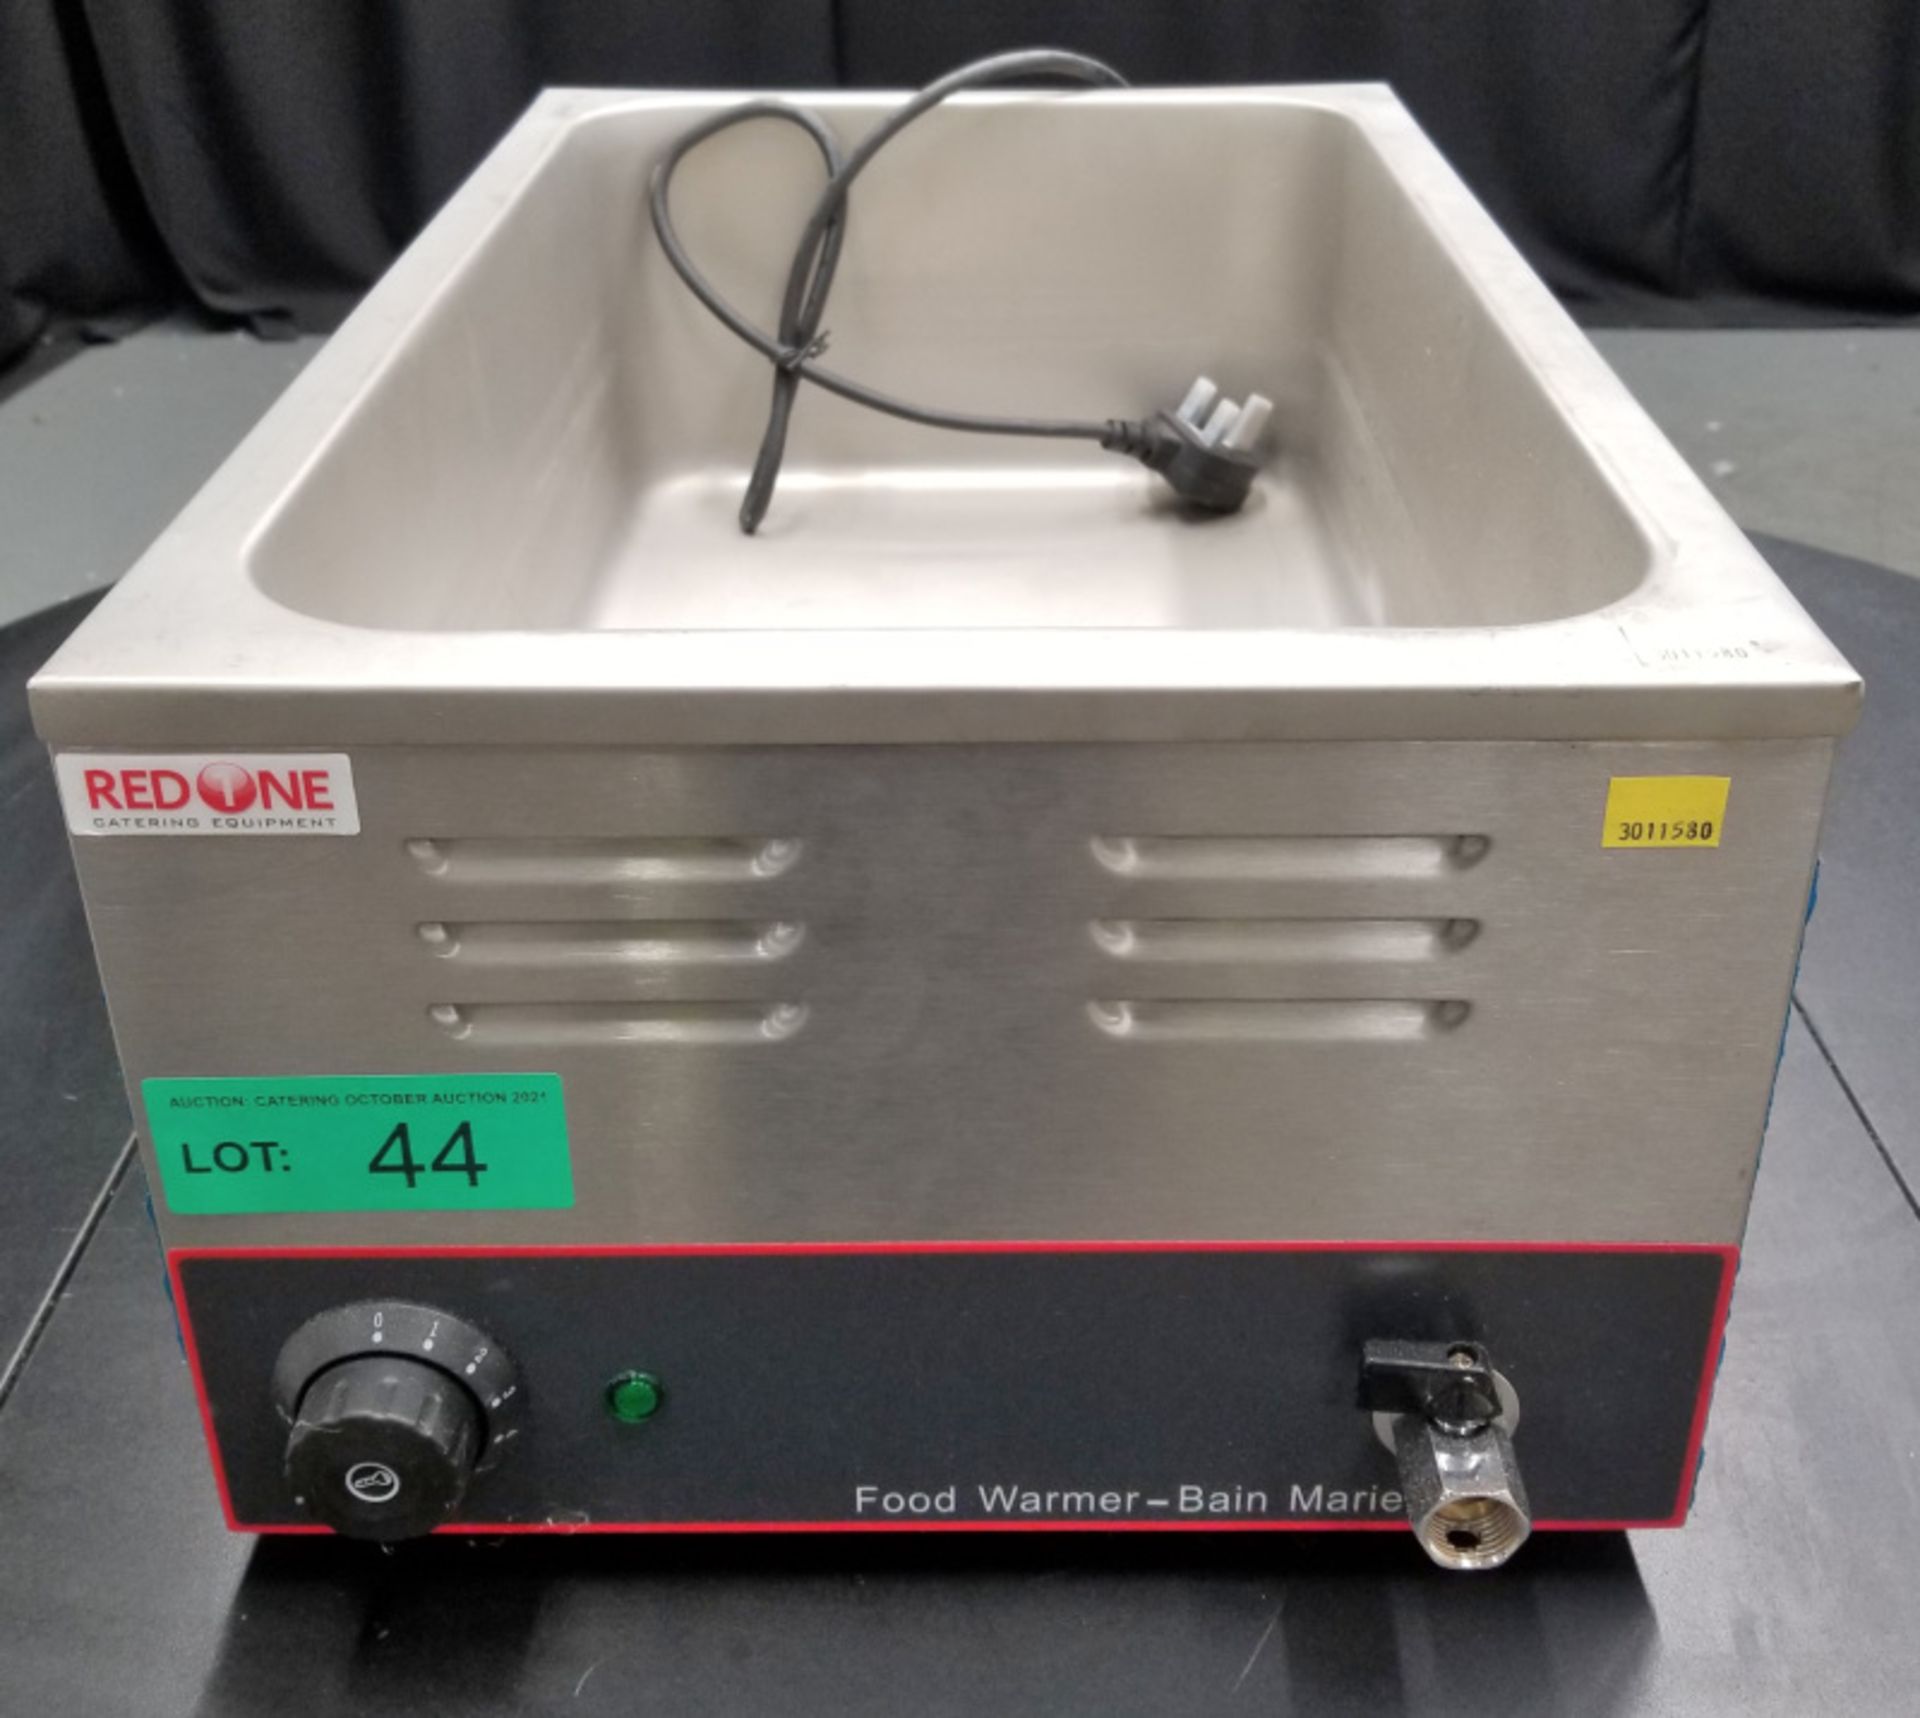 Red One Bain Marie - Model ROBM - L350 x W560 x H250mm - PLEASE SEE PICTURES FOR DAMAGE